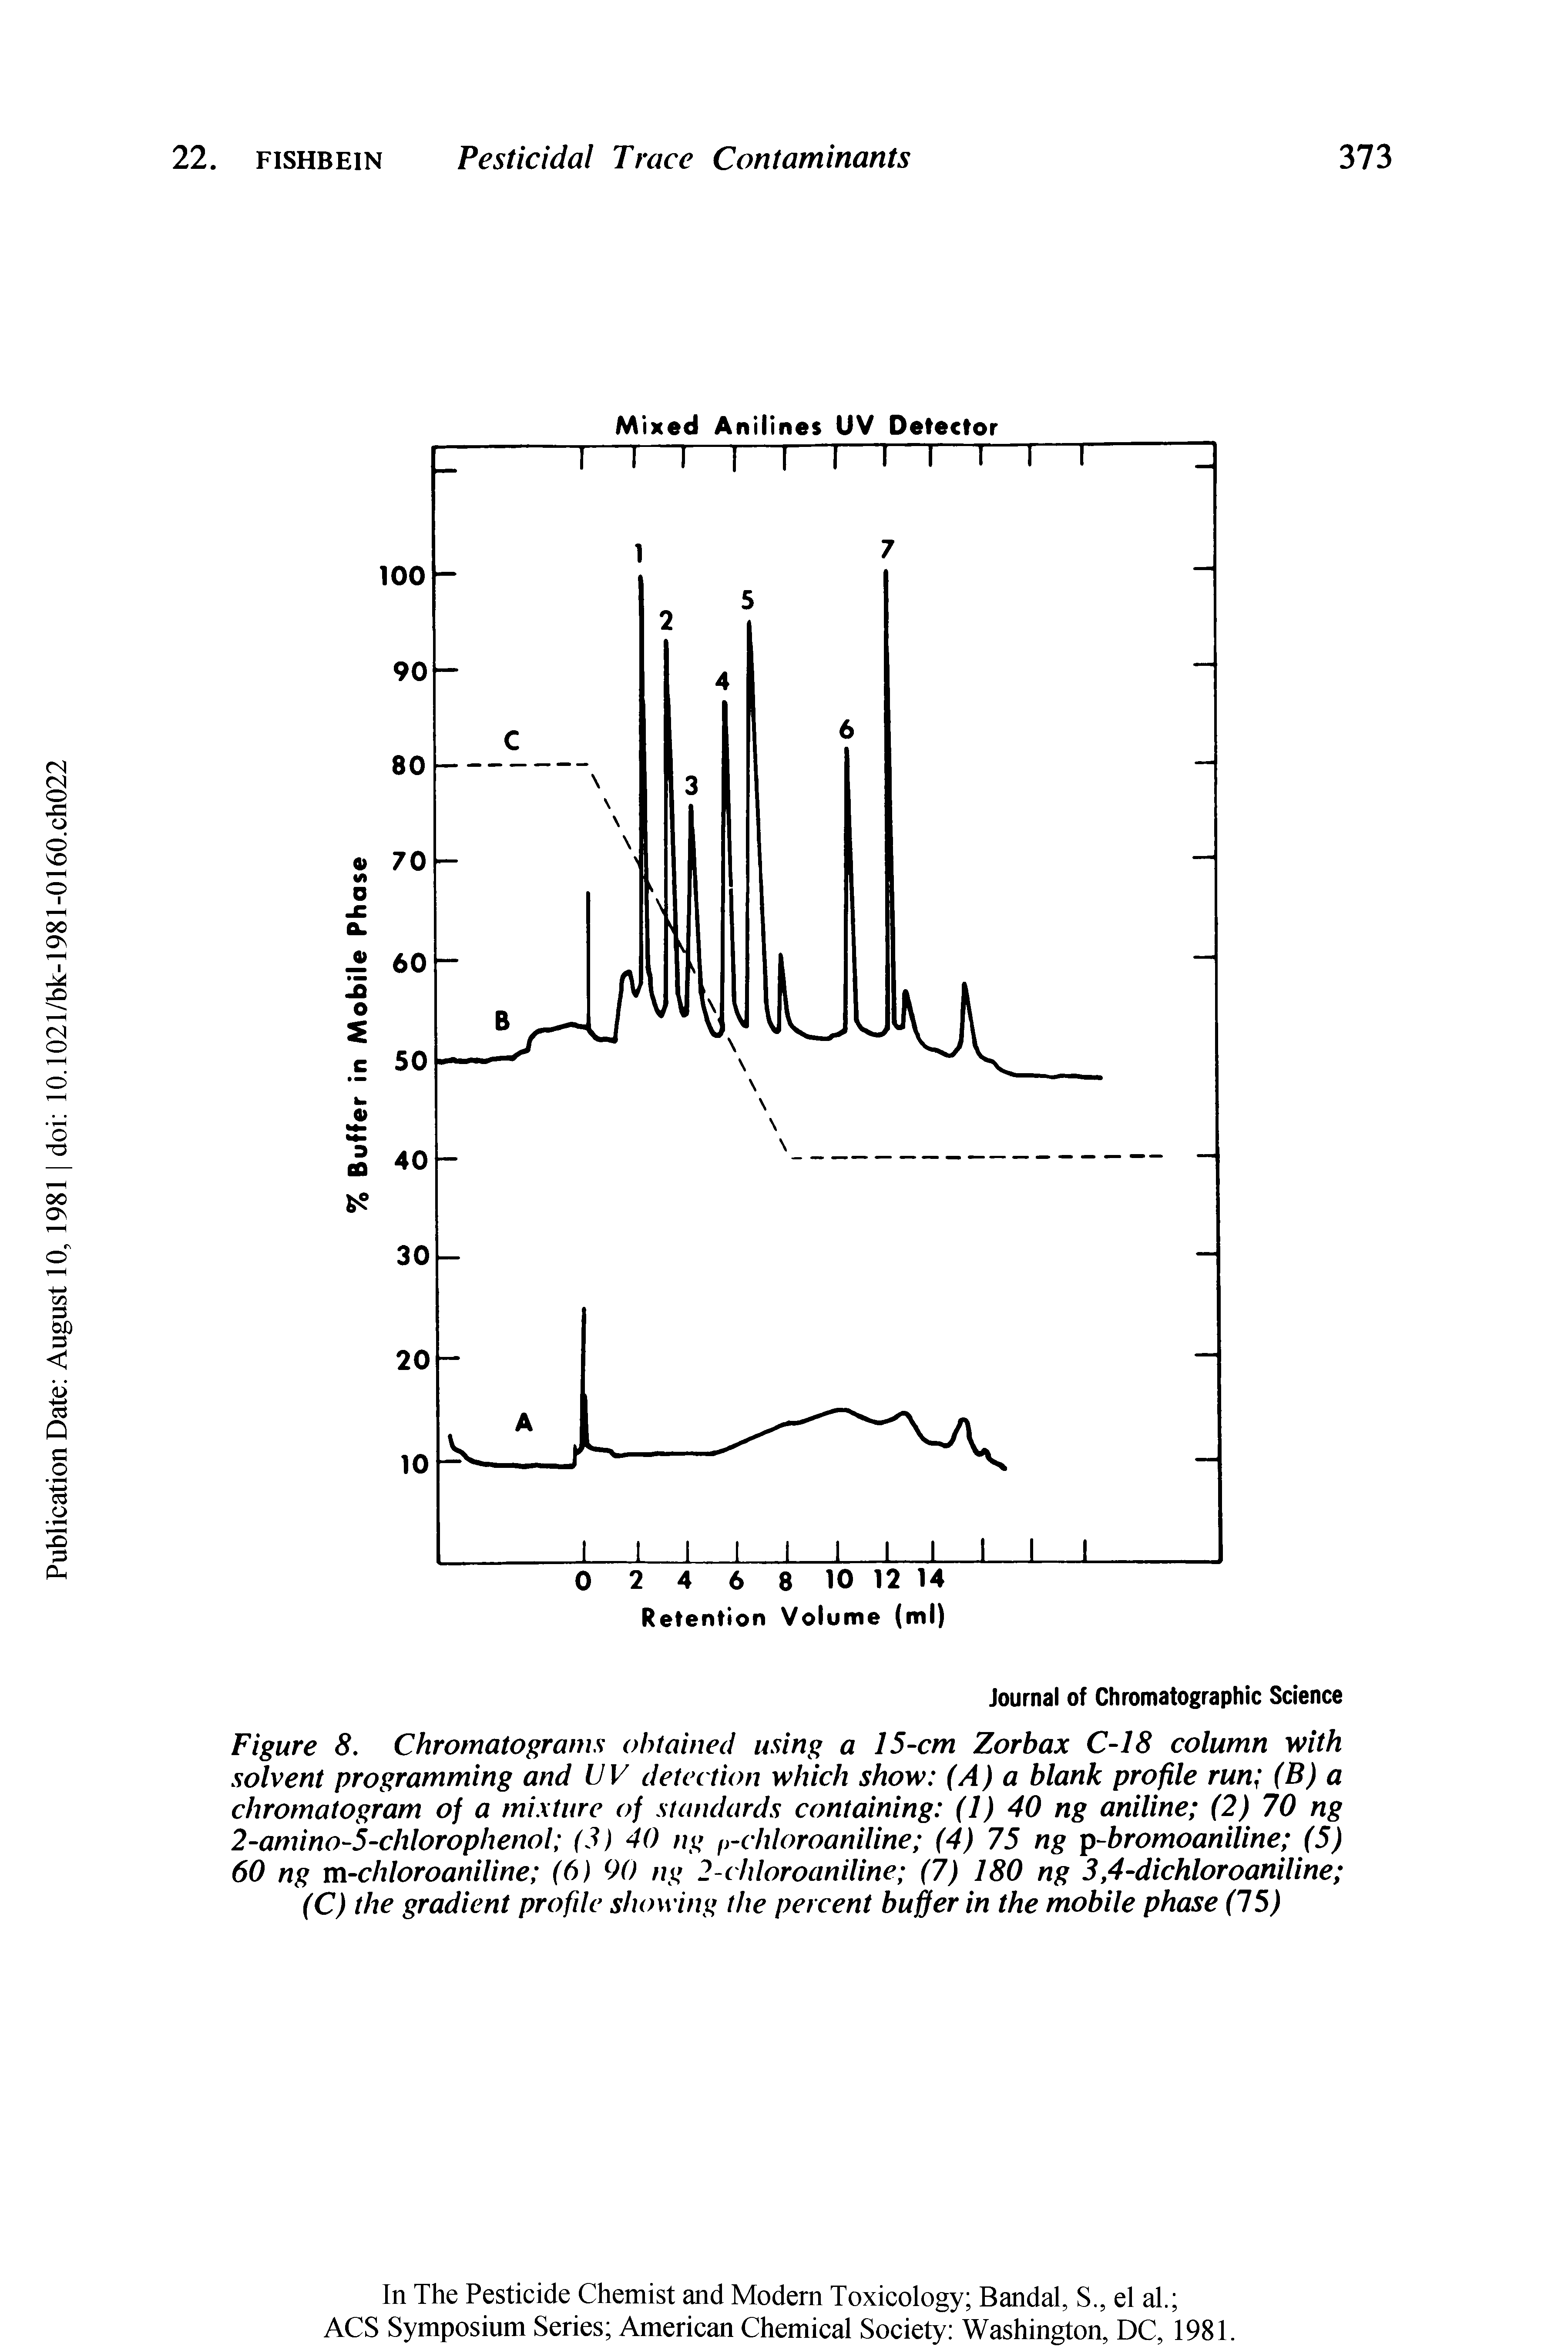 Figure 8. Chromatograms obtained using a 15-cm Zorbax C-18 column with solvent programming and UV detection which show (A) a blank profile run (B) a chromatogram of a mixture of standards containing (1) 40 ng aniline (2) 70 ng 2-amino 5-chlorophenol (3) 40 ng p-chloroaniline (4) 75 ng p-bromoaniline (5) 60 ng m-chloroaniline (6) 90 ng 2-chloroaniline (7) 180 ng 3,4-dichloroaniline (C) the gradient profde showing the percent buffer in the mobile phase (15)...